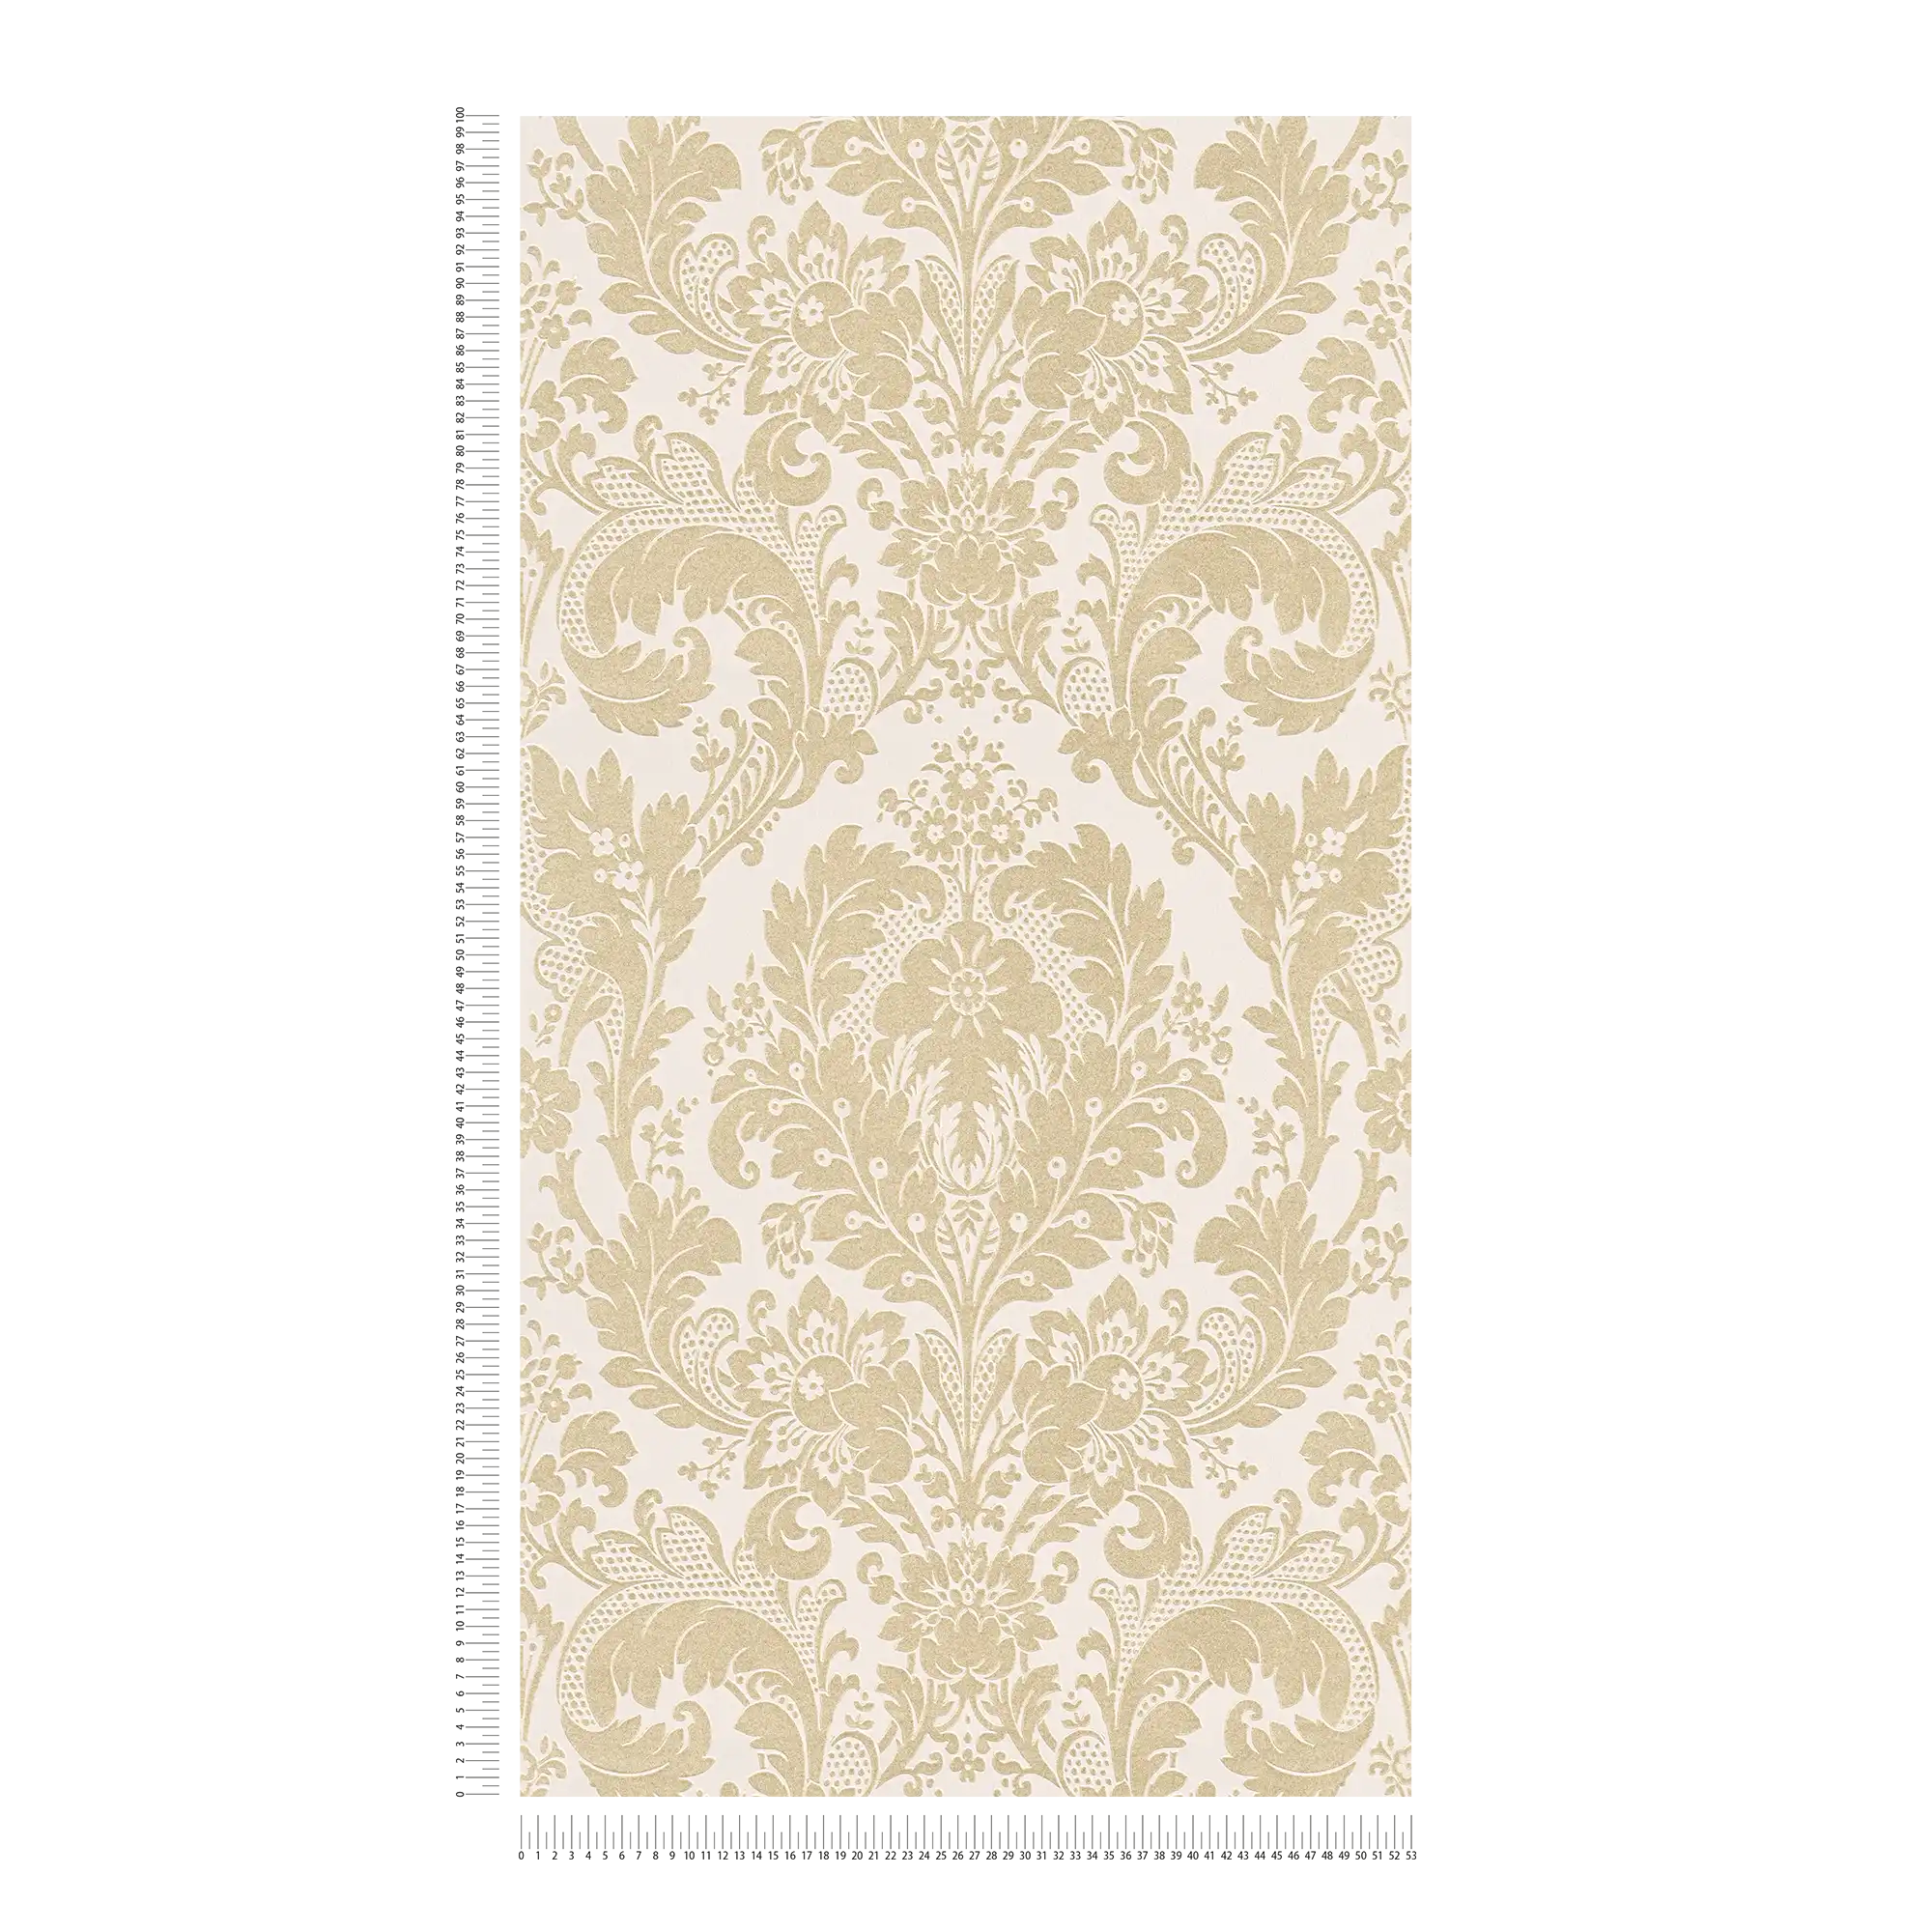             Baroque wallpaper gold ornaments floral with structure embossing
        